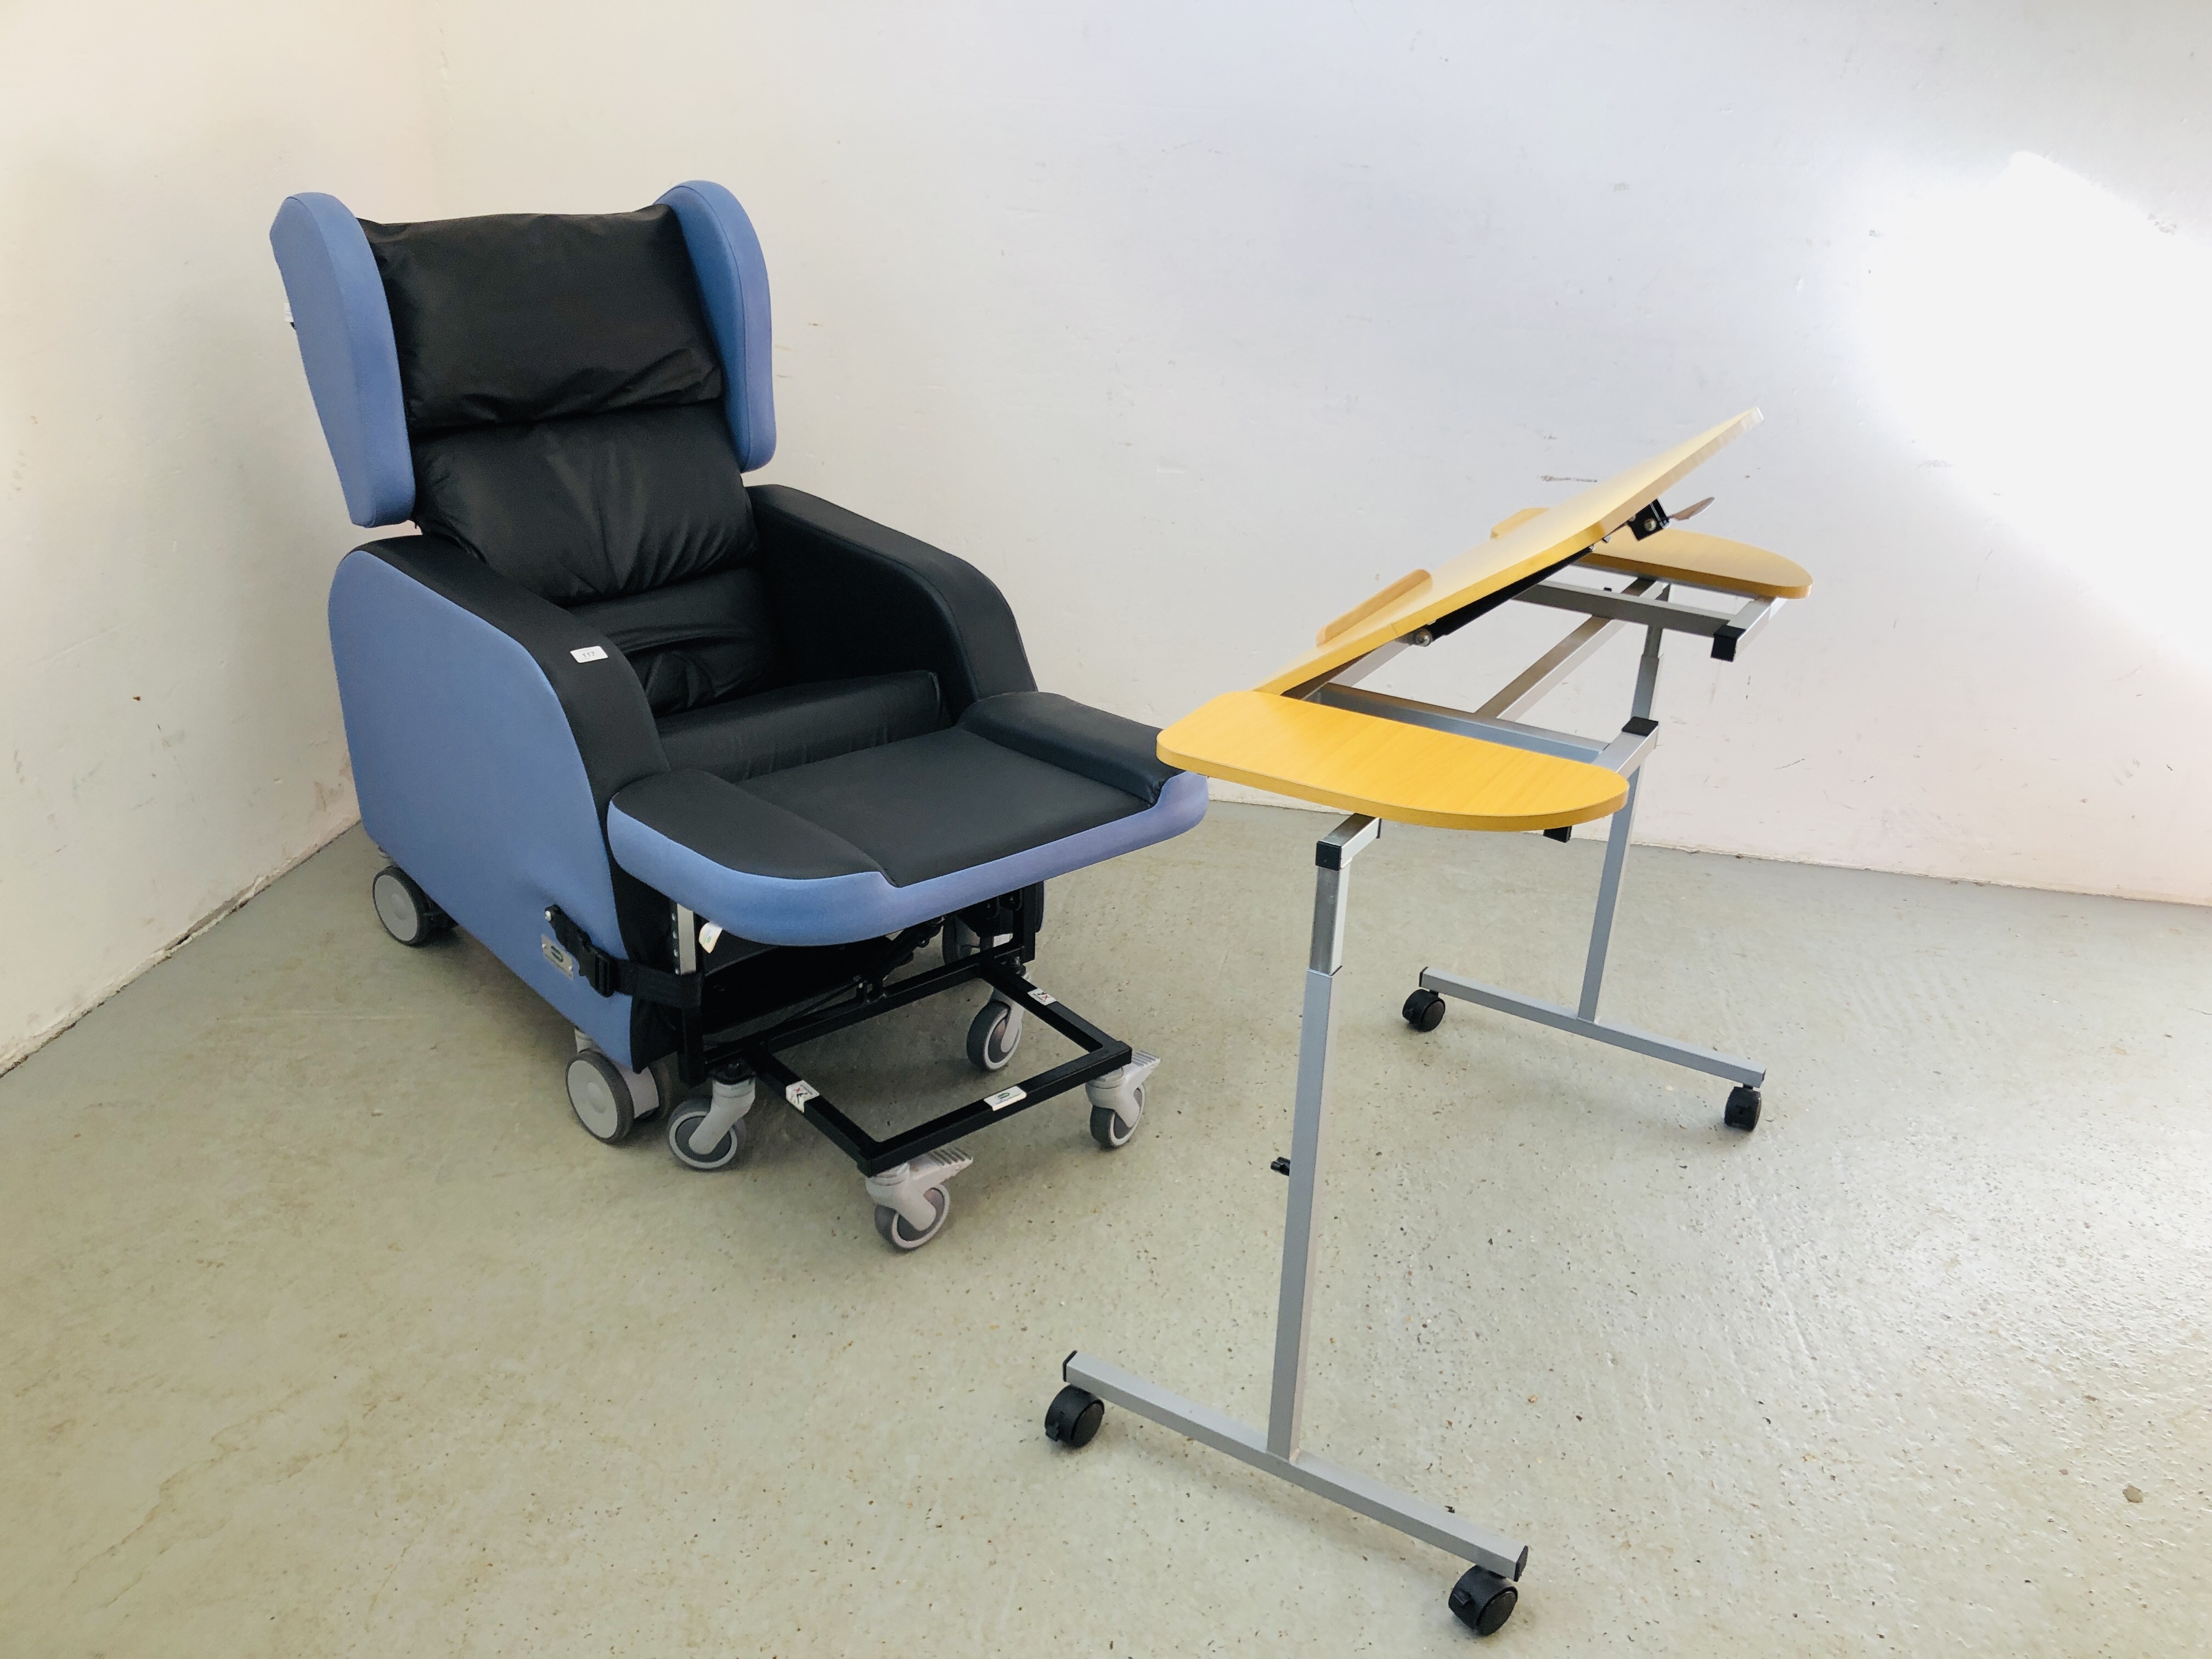 A "SEATING MATTRESS" RECLINING MOBILITY EASY CHAIR AND MATCHING FOOTSTOOL AND ADJUSTABLE BED/CHAIR